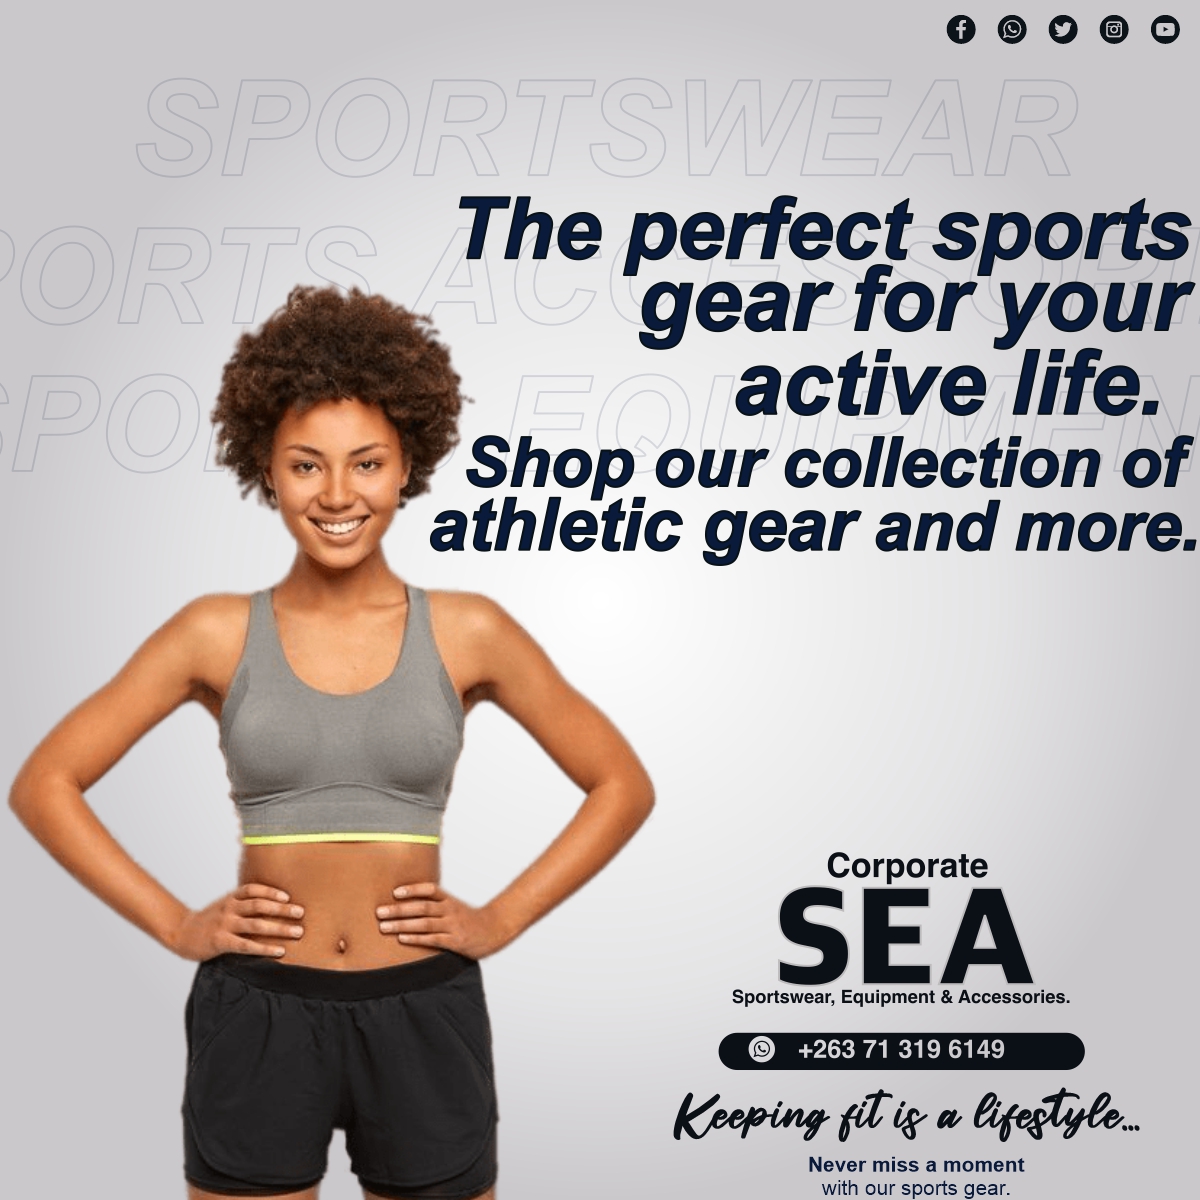 We are Elmala Sports, your number corporate sportswear, sports equipment, and accessories supplier.
 The perfect sports gear for your active life. Shop our collection of athletic gear and more.
 #sportskit #buylocal #sportsaccessories #sportwearstore #harare #sportequipment